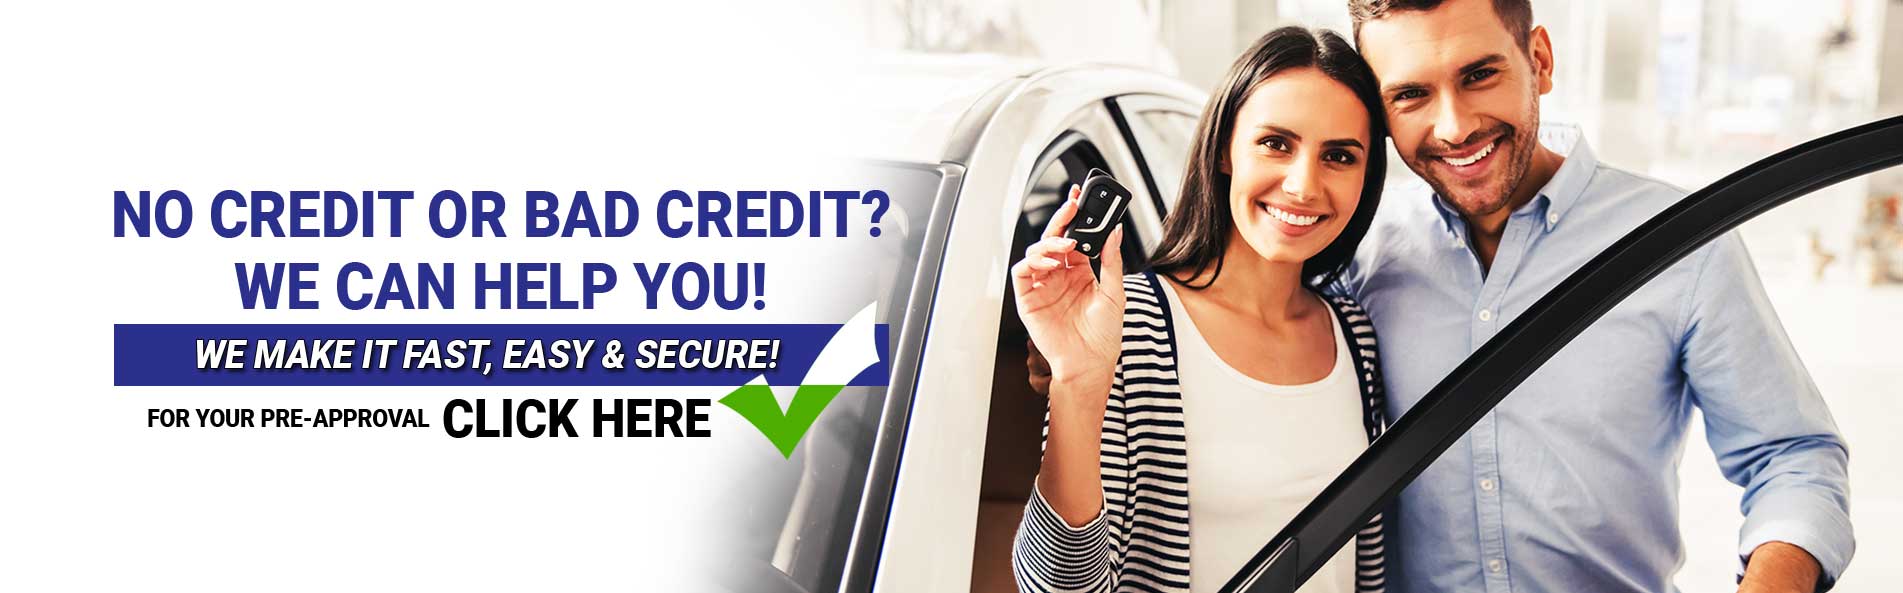 No credit or bad credit?  We can help you!